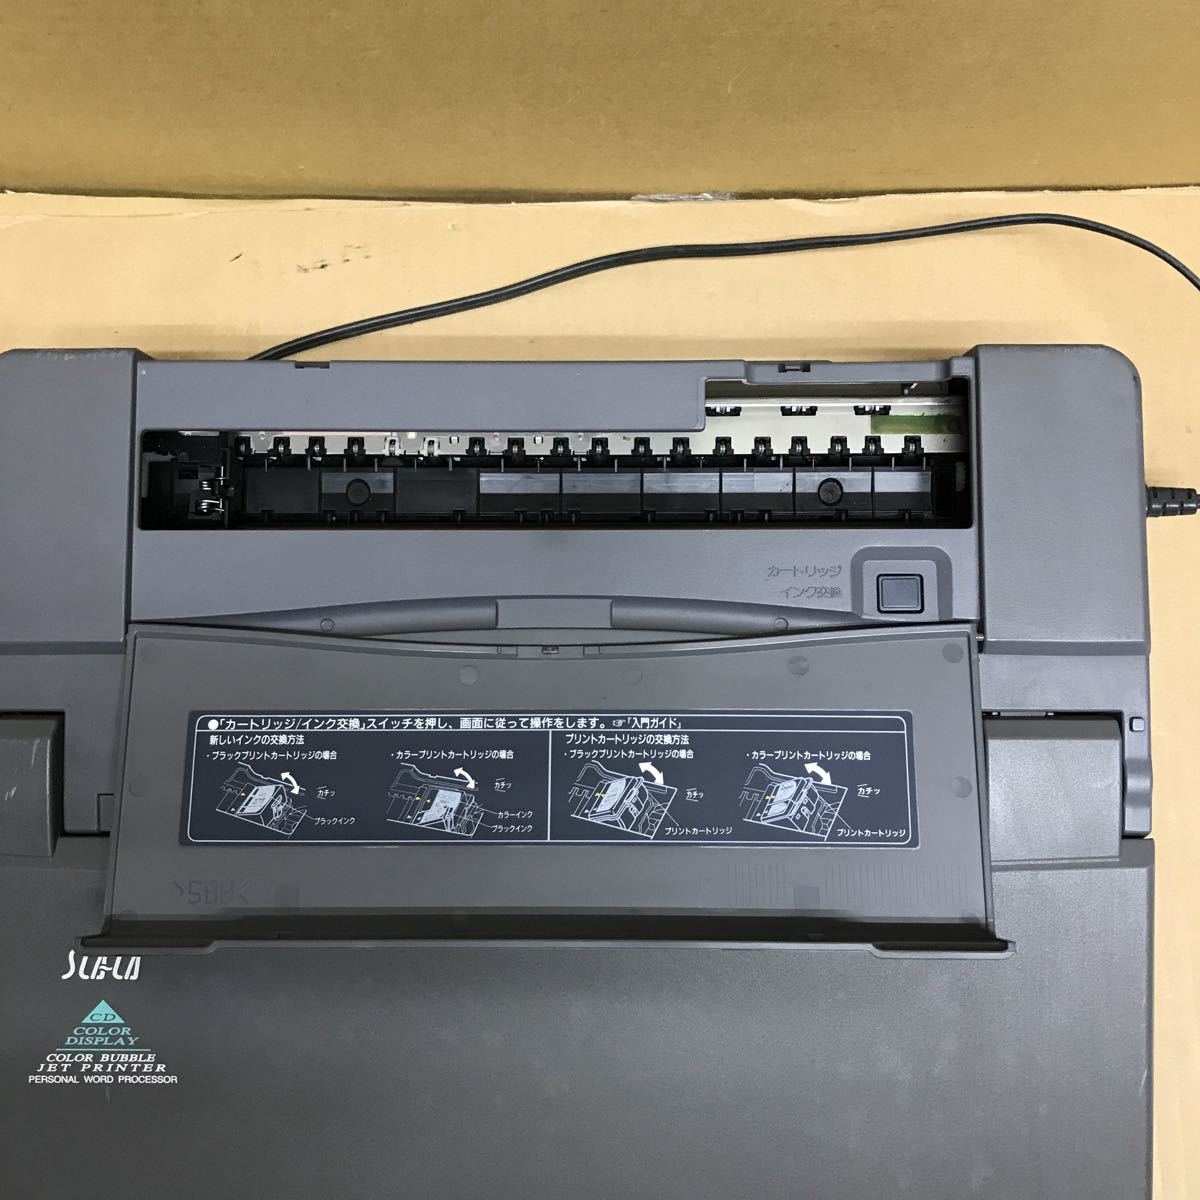  Panasonic word-processor FW-U1CD330 service being completed 3 months guarantee equipped 